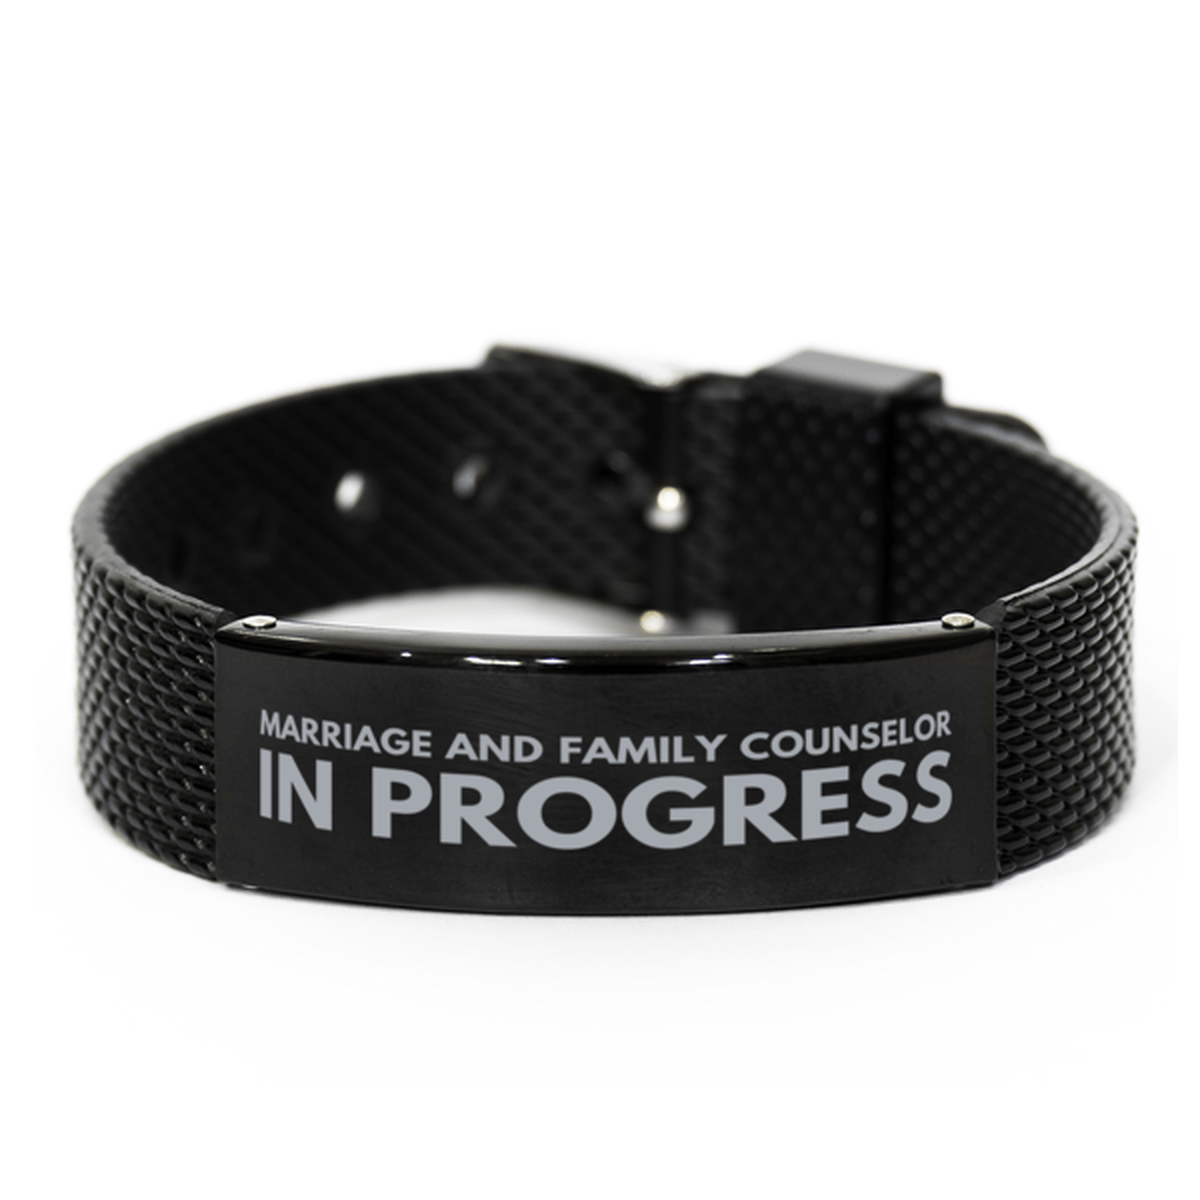 Inspirational Marriage And Family Counselor Black Shark Mesh Bracelet, Marriage And Family Counselor In Progress, Best Graduation Gifts for Students